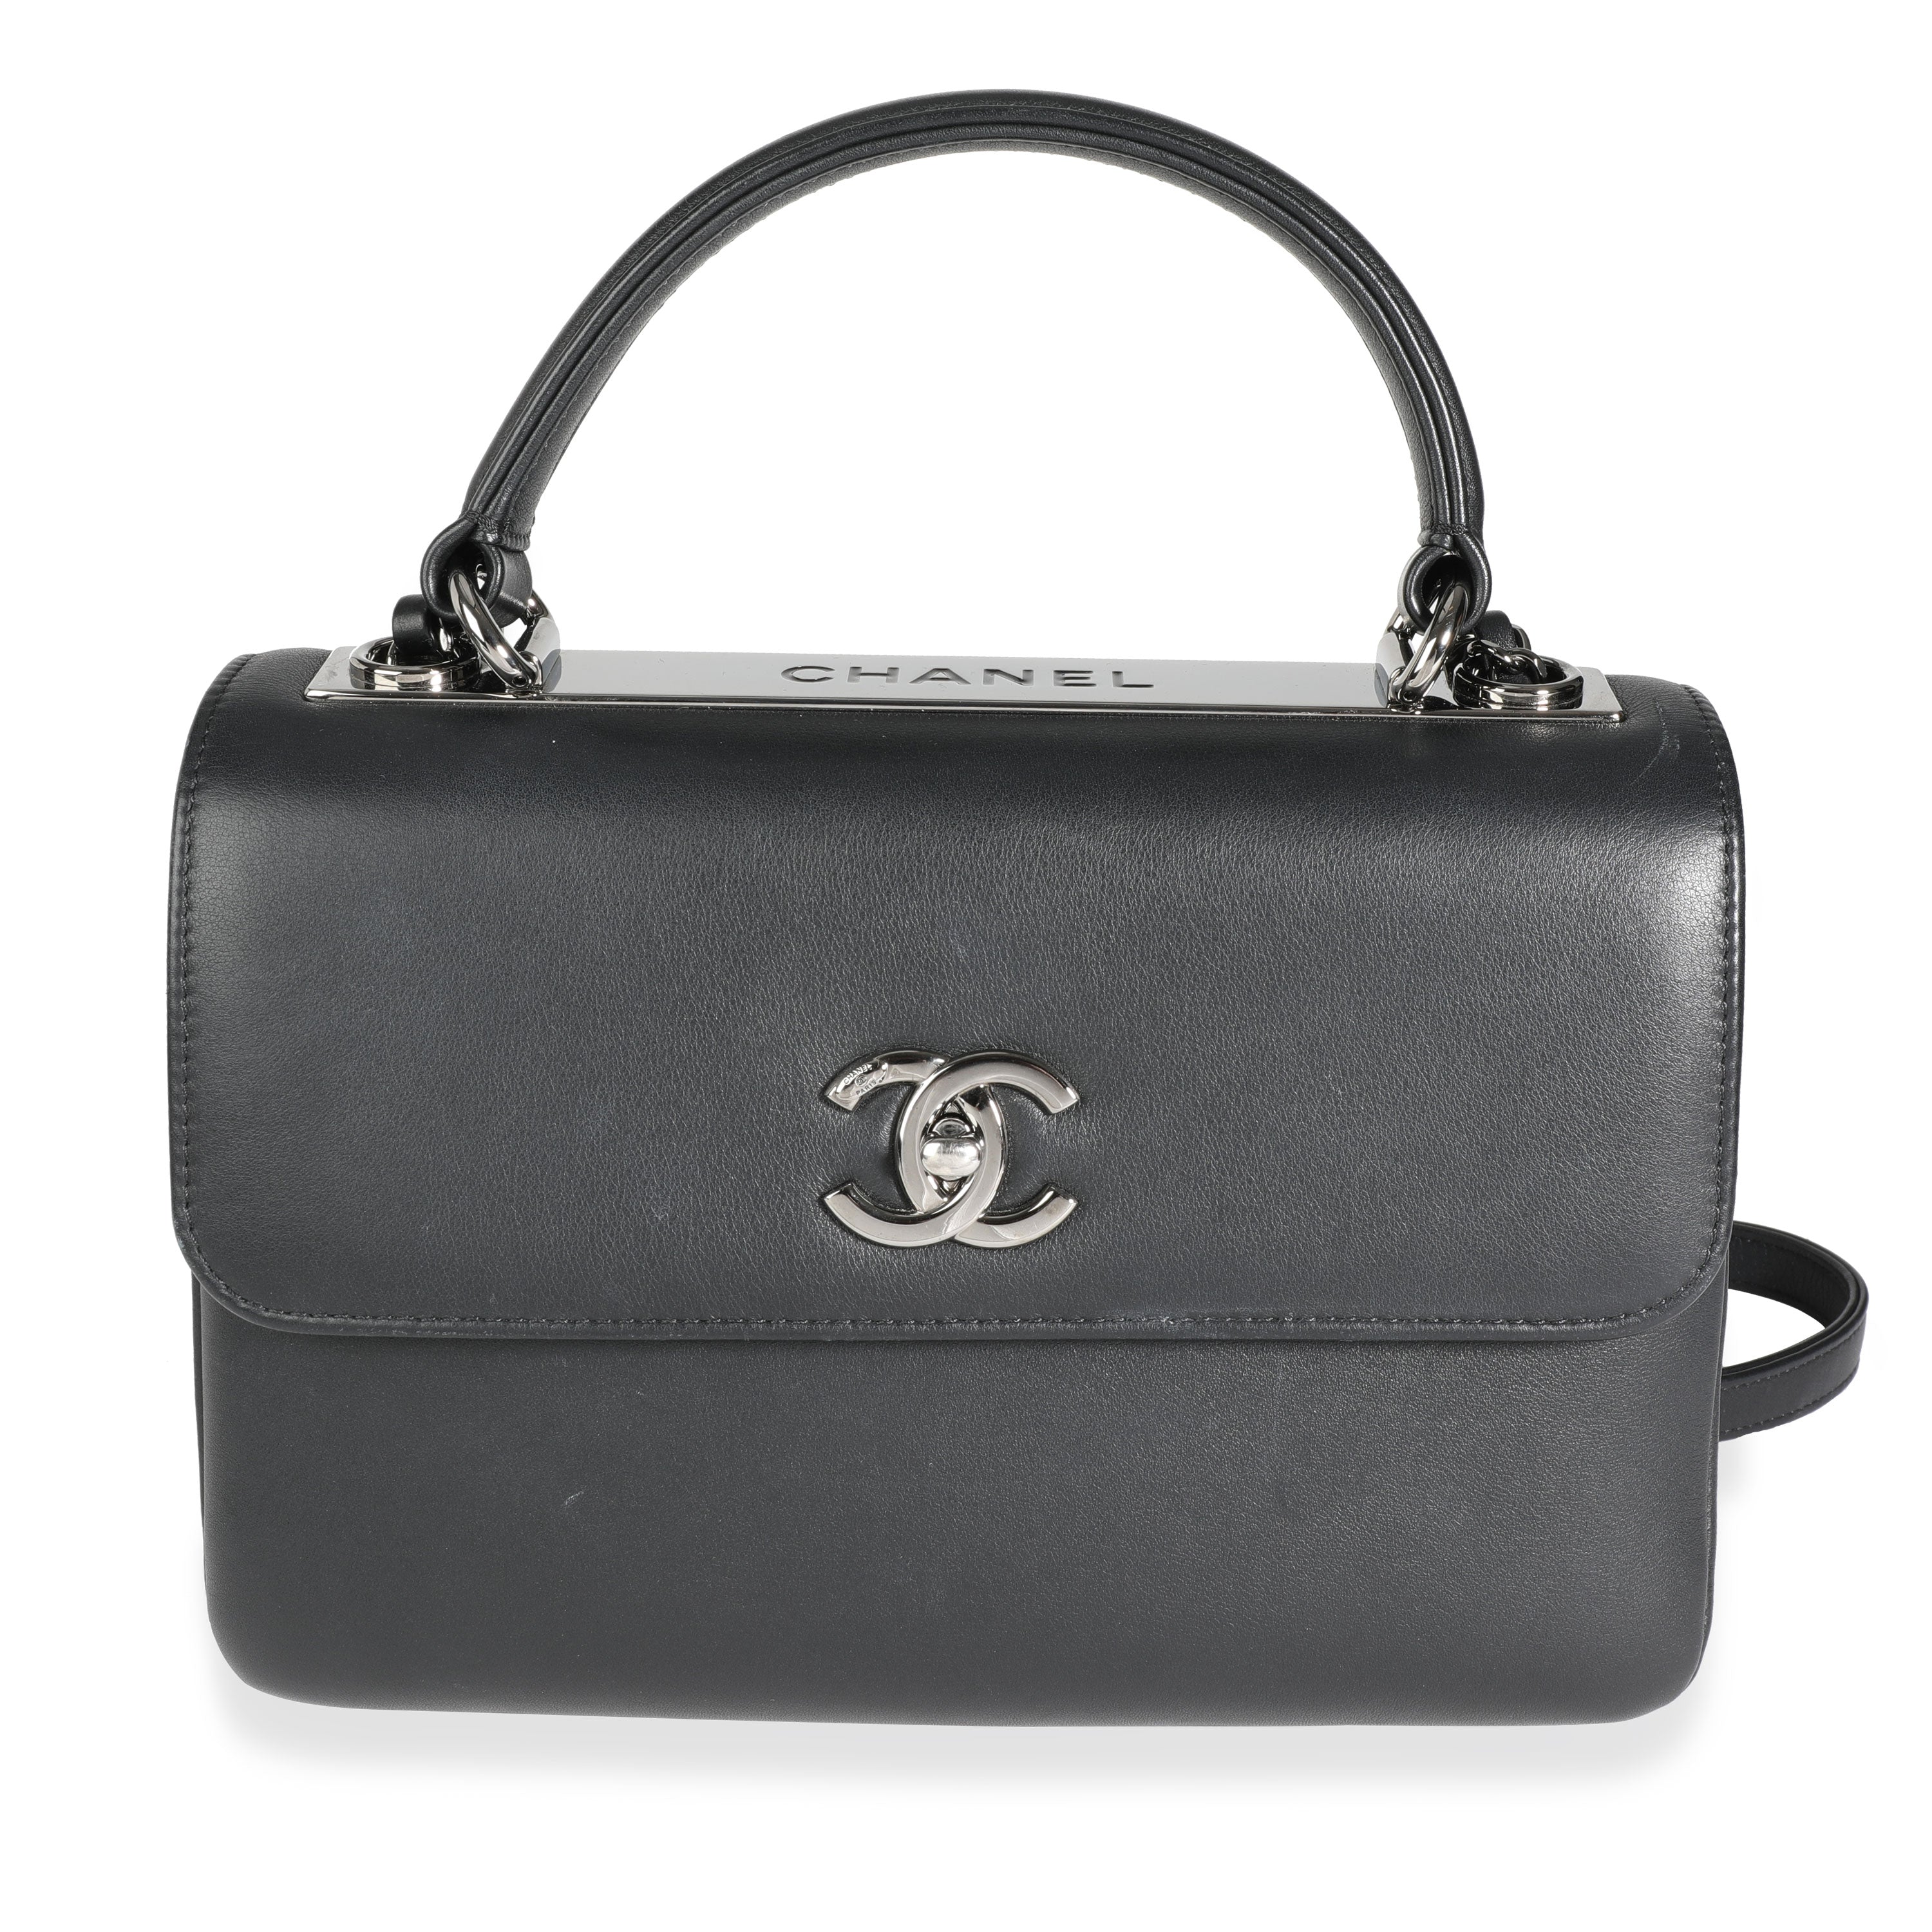 Chanel Black Smooth Calfskin Small Trendy CC Top Handle Flap